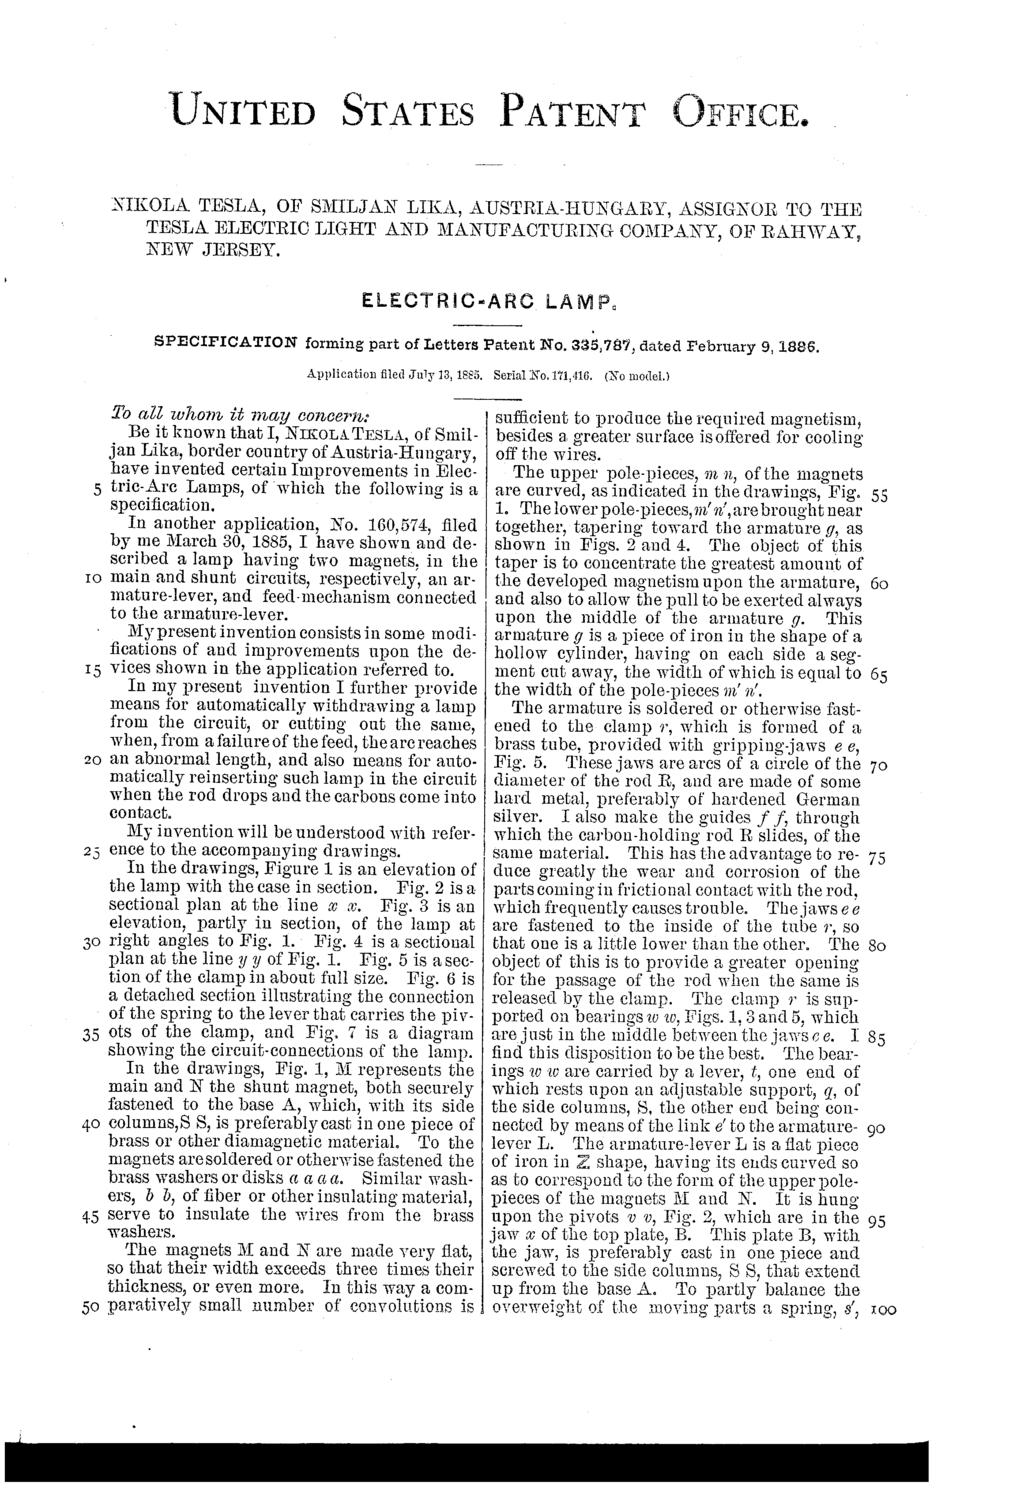 UNITED STATES PATENT OFFICE. NIKOLATESLA, OF SMILJAN LIKA, AUSTRIA-HUNGARY, ASSIGNOR TO THE TESLAELECTRIC LIGHT AND MANUFACTURING COMPANY, OF RAHWAY, NEW JERSEY.